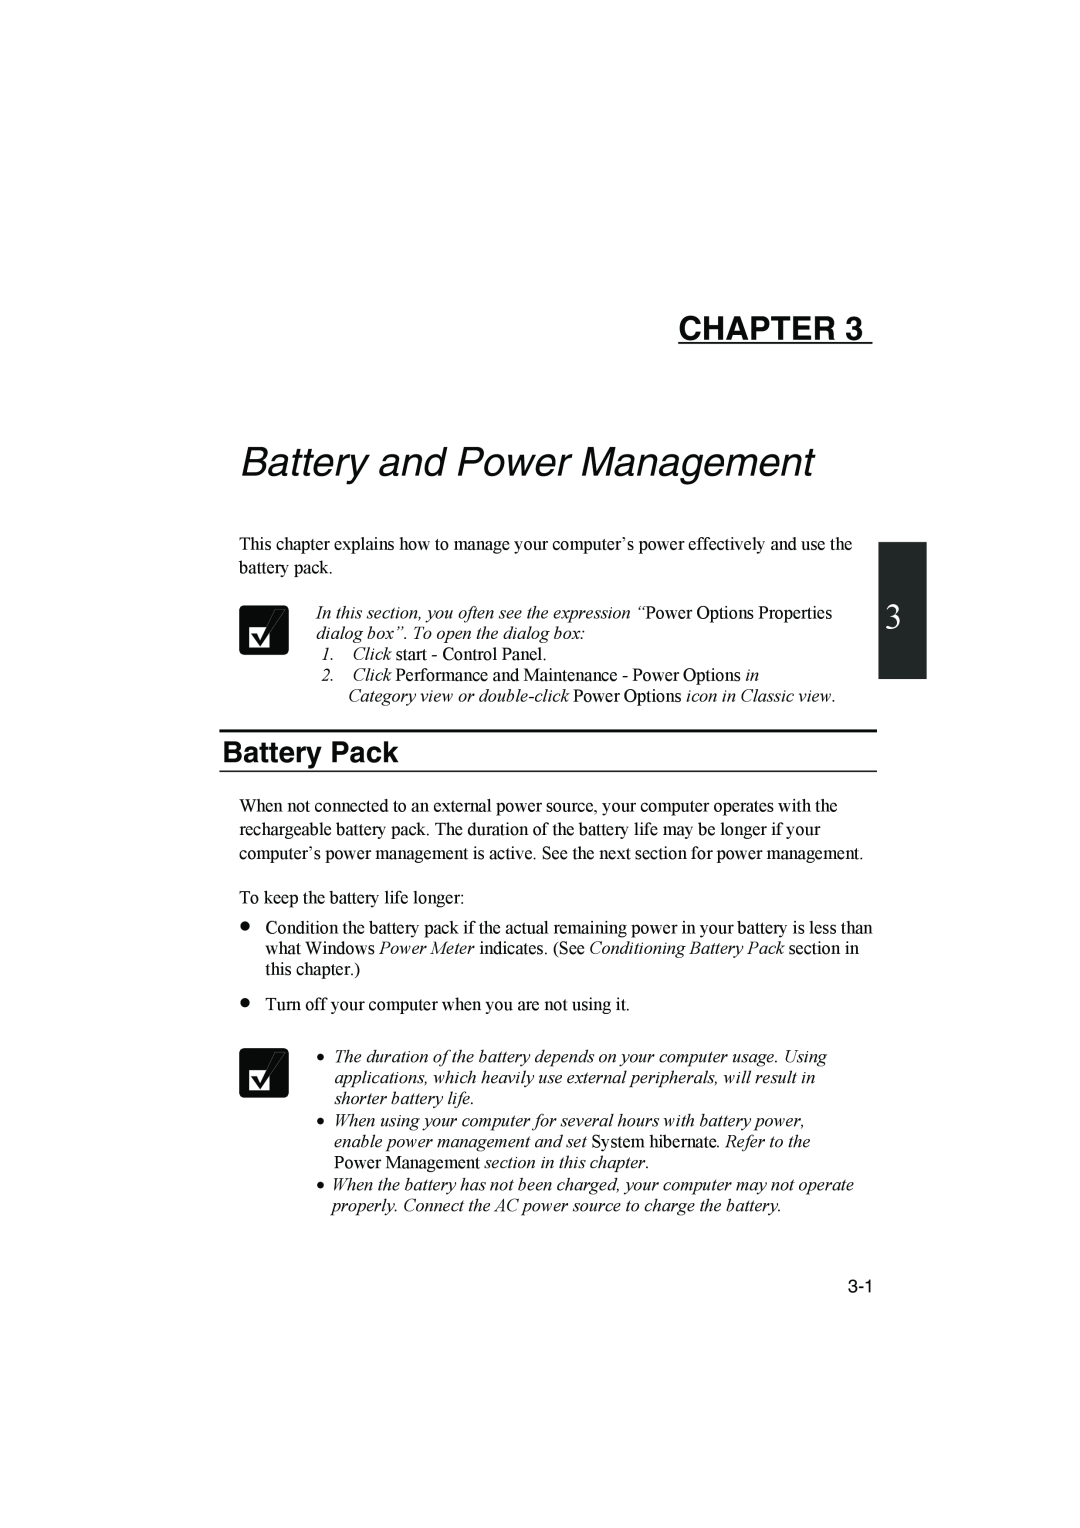 Sharp PC-MM1 manual Battery and Power Management, Battery Pack, Chapter 